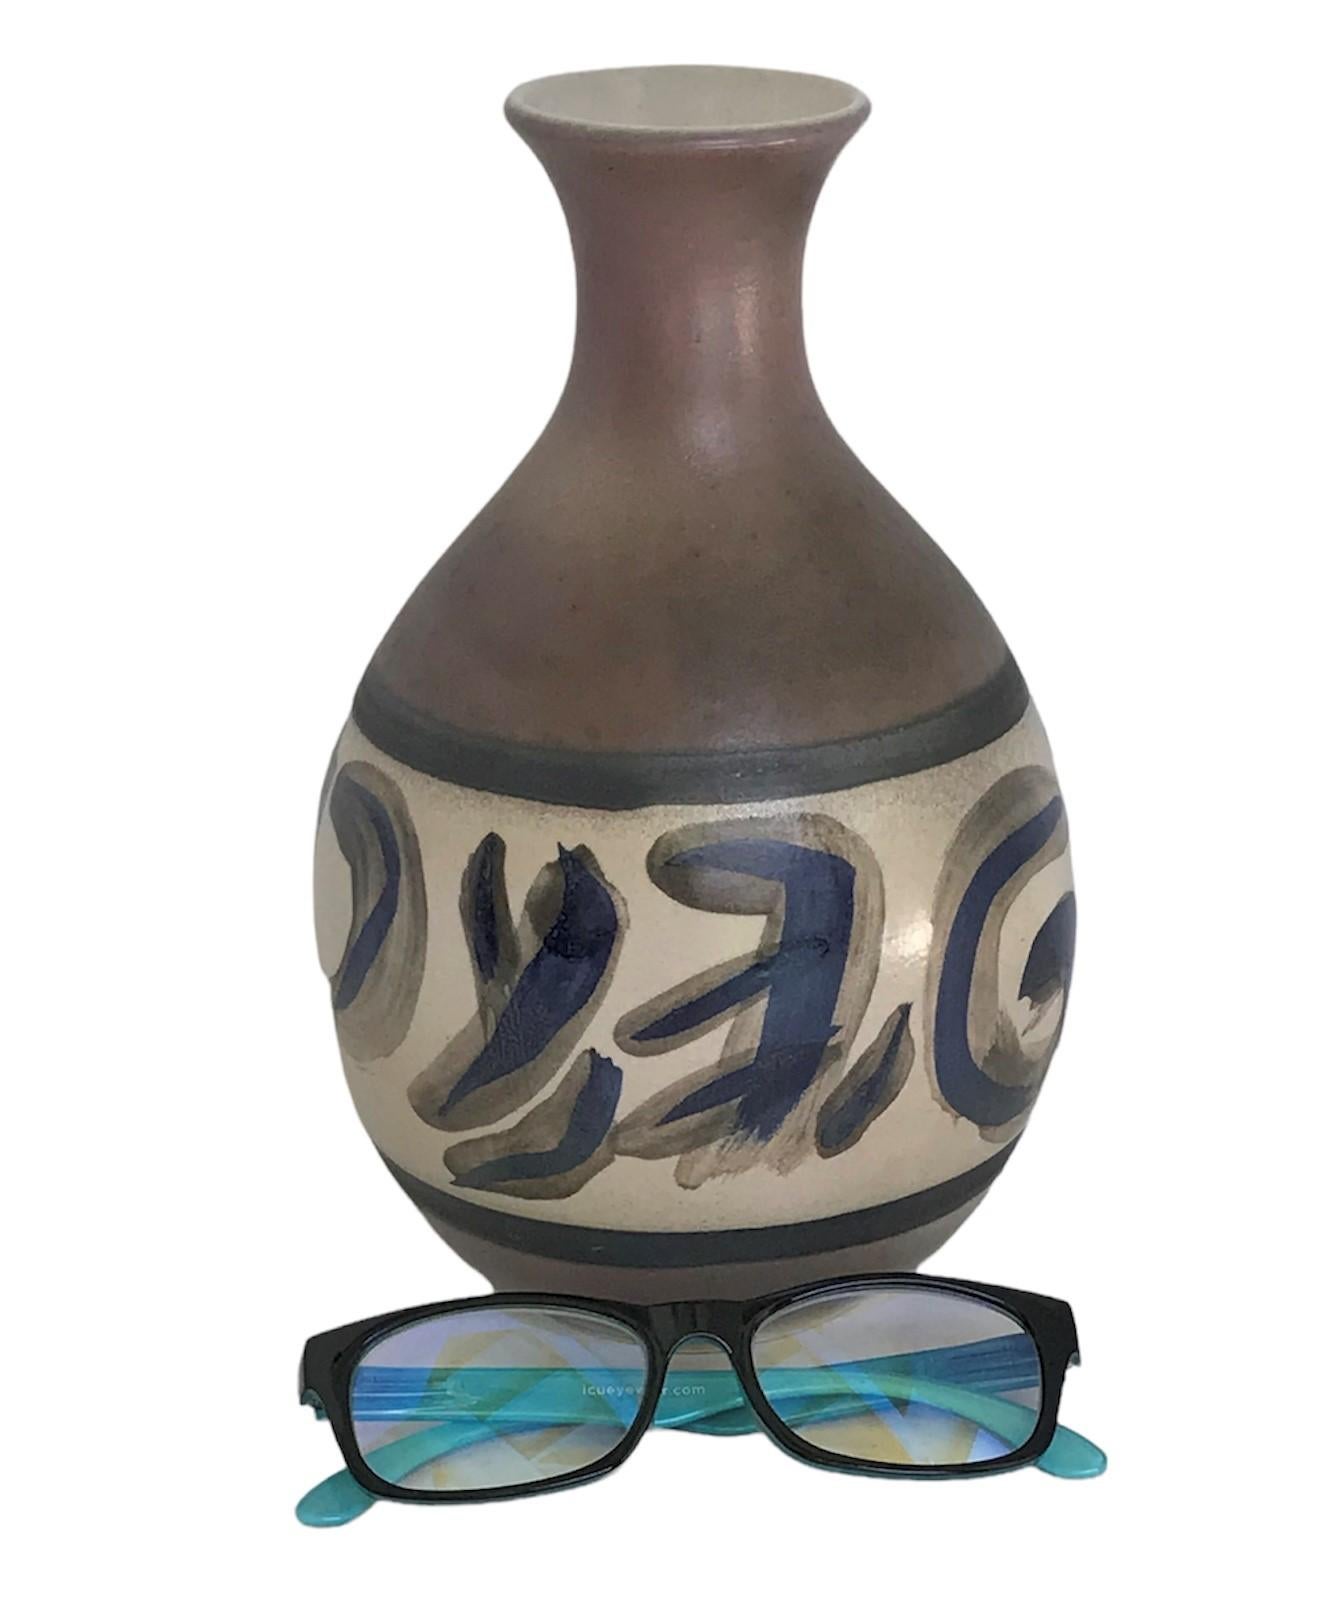 A rare, hand-signed and large “Sorne” Vase by Swedish ceramicist Carl-Harry Stålhane for Designhuset, Sweden. A big bellied form with a neck spout, it is painted underglaze brown with a centered area with abstract symbols, circles and shapes.

In